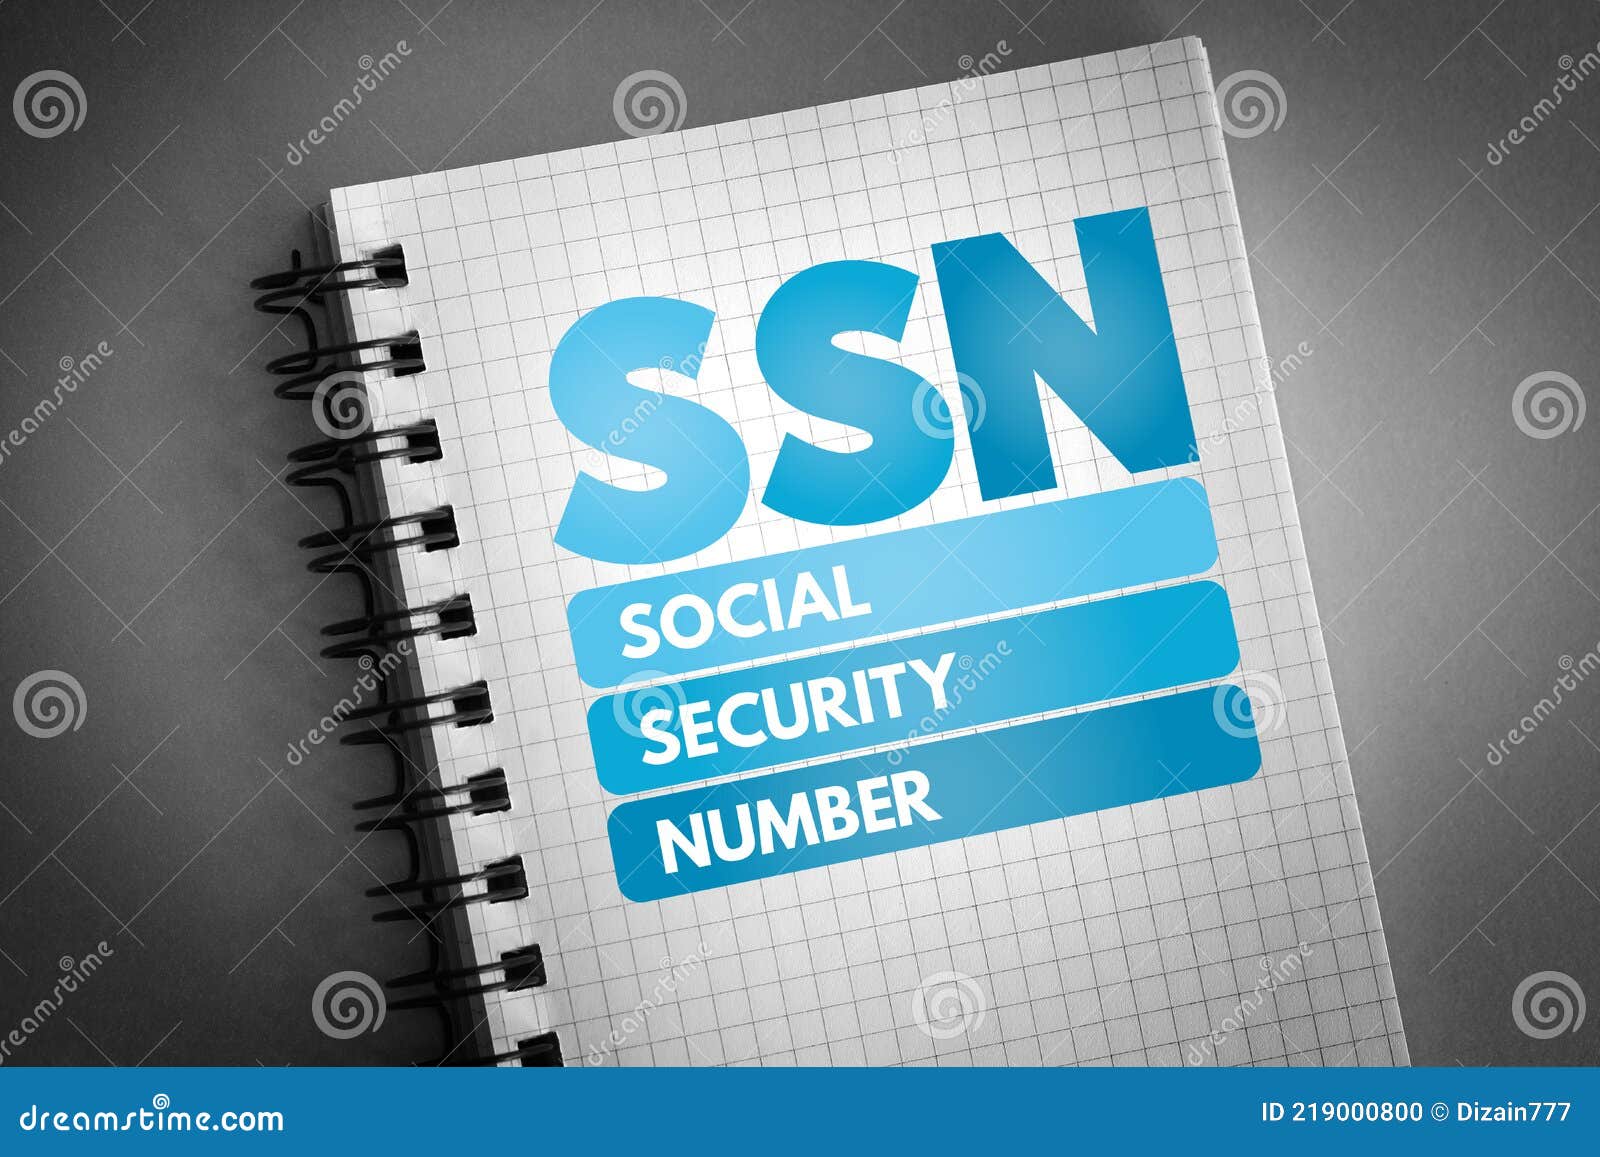 ssn - social security number acronym on notepad, concept background